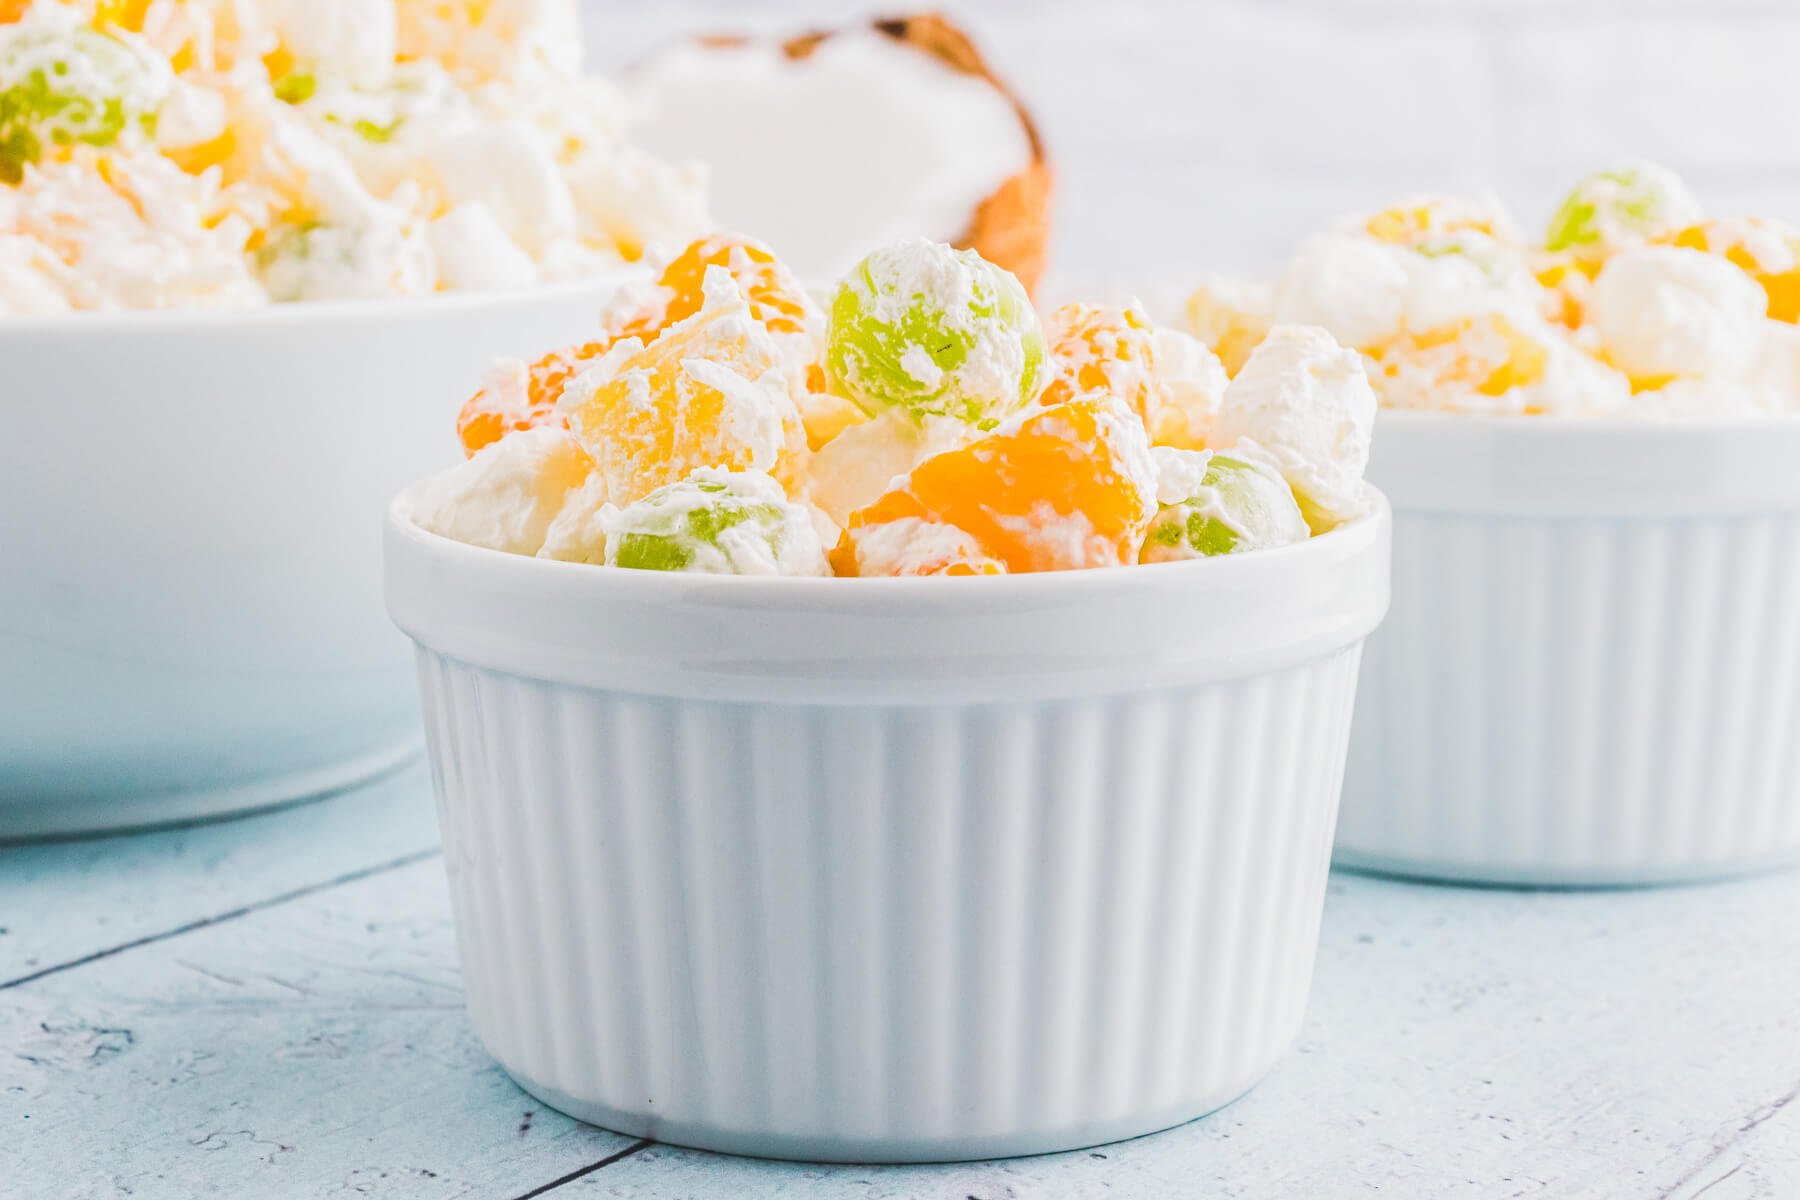 Three white bowls of fluffy dreamy Ambrosia fruit salad on a light blue background.